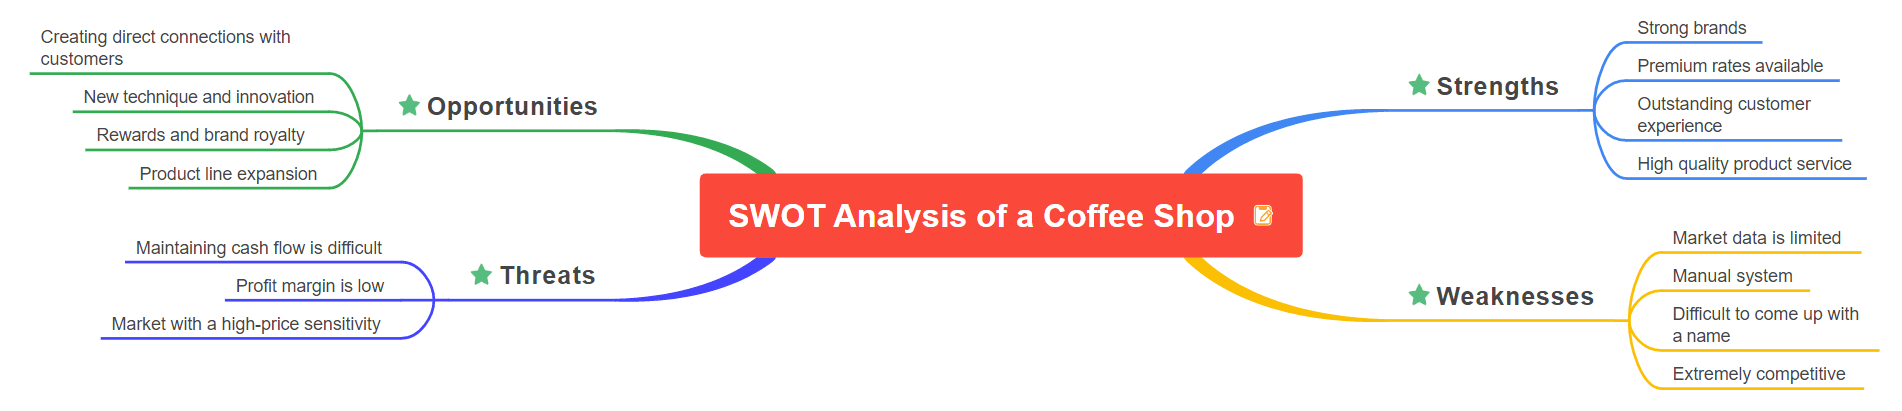 SWOT Analysis for a coffee shop